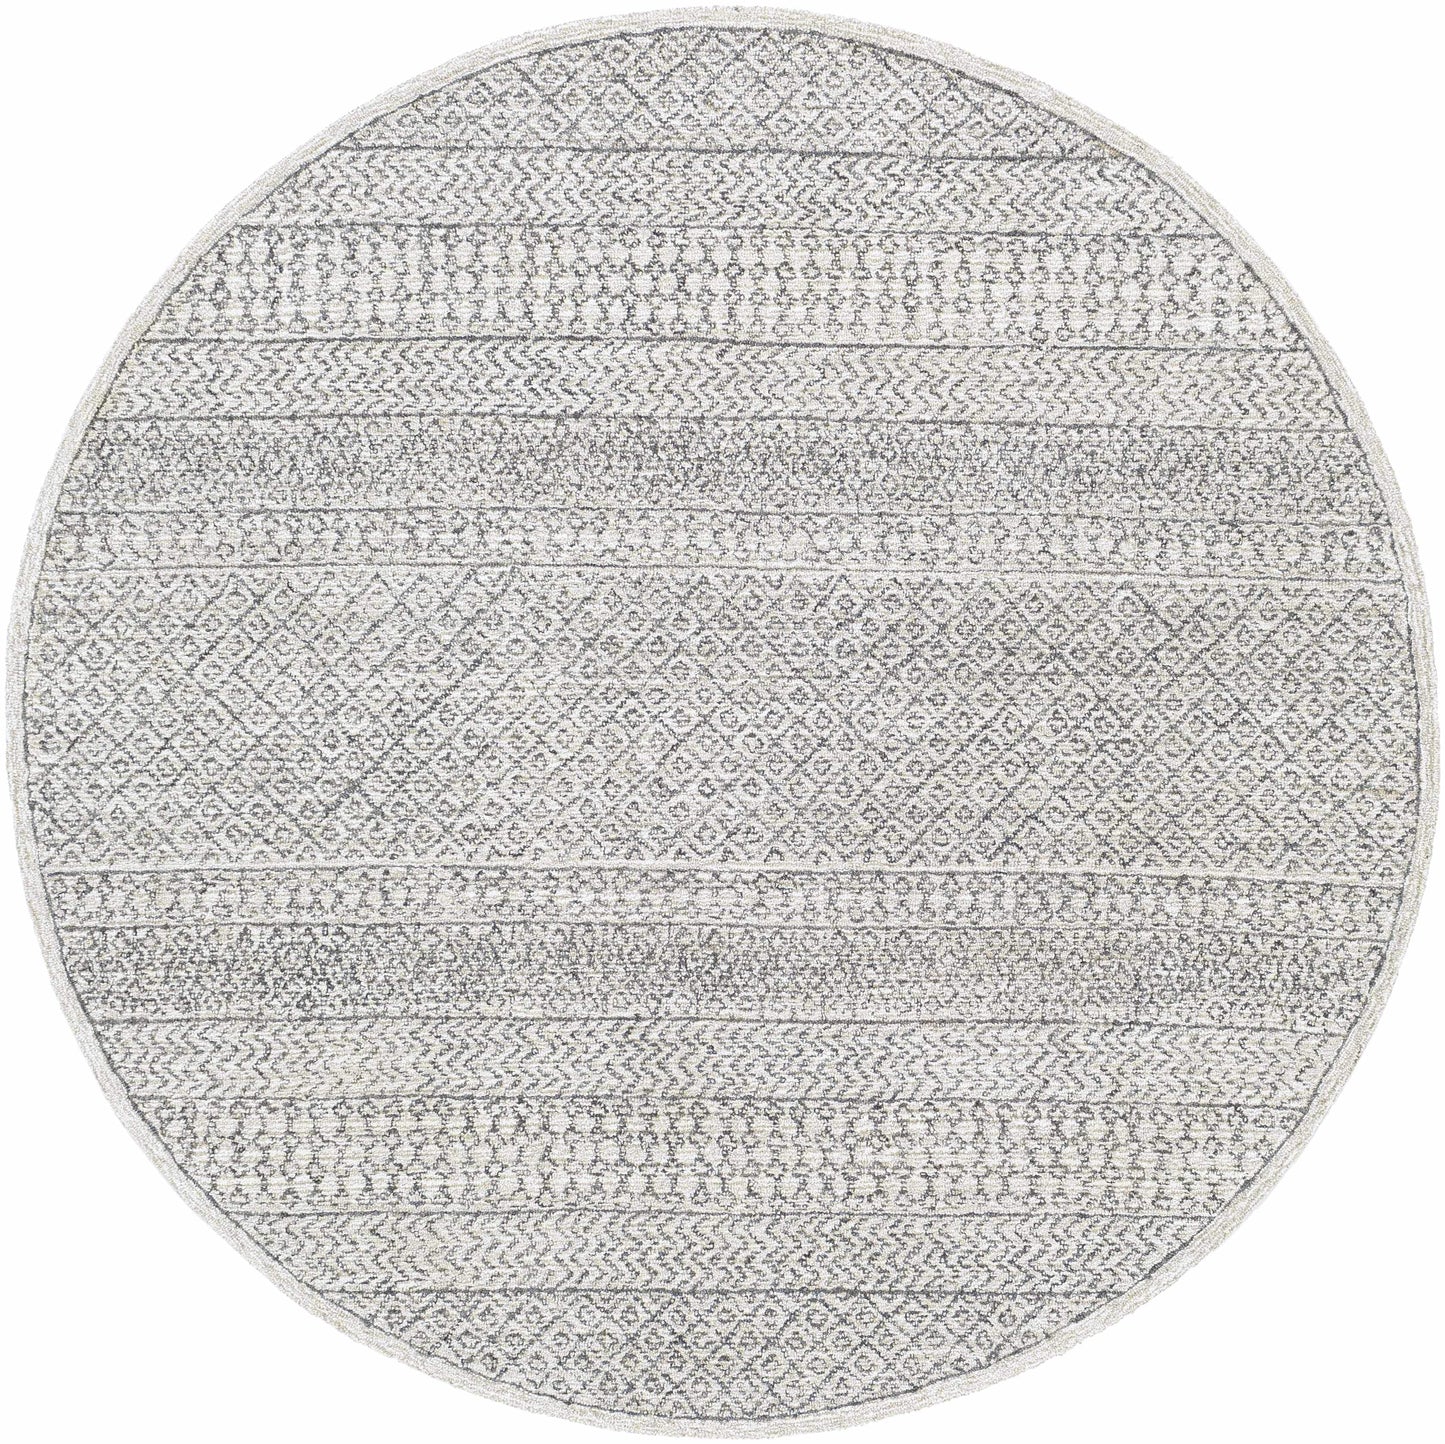 Boutique Rugs Rugs 6' Round Dugway Tufted Wool Area Rug